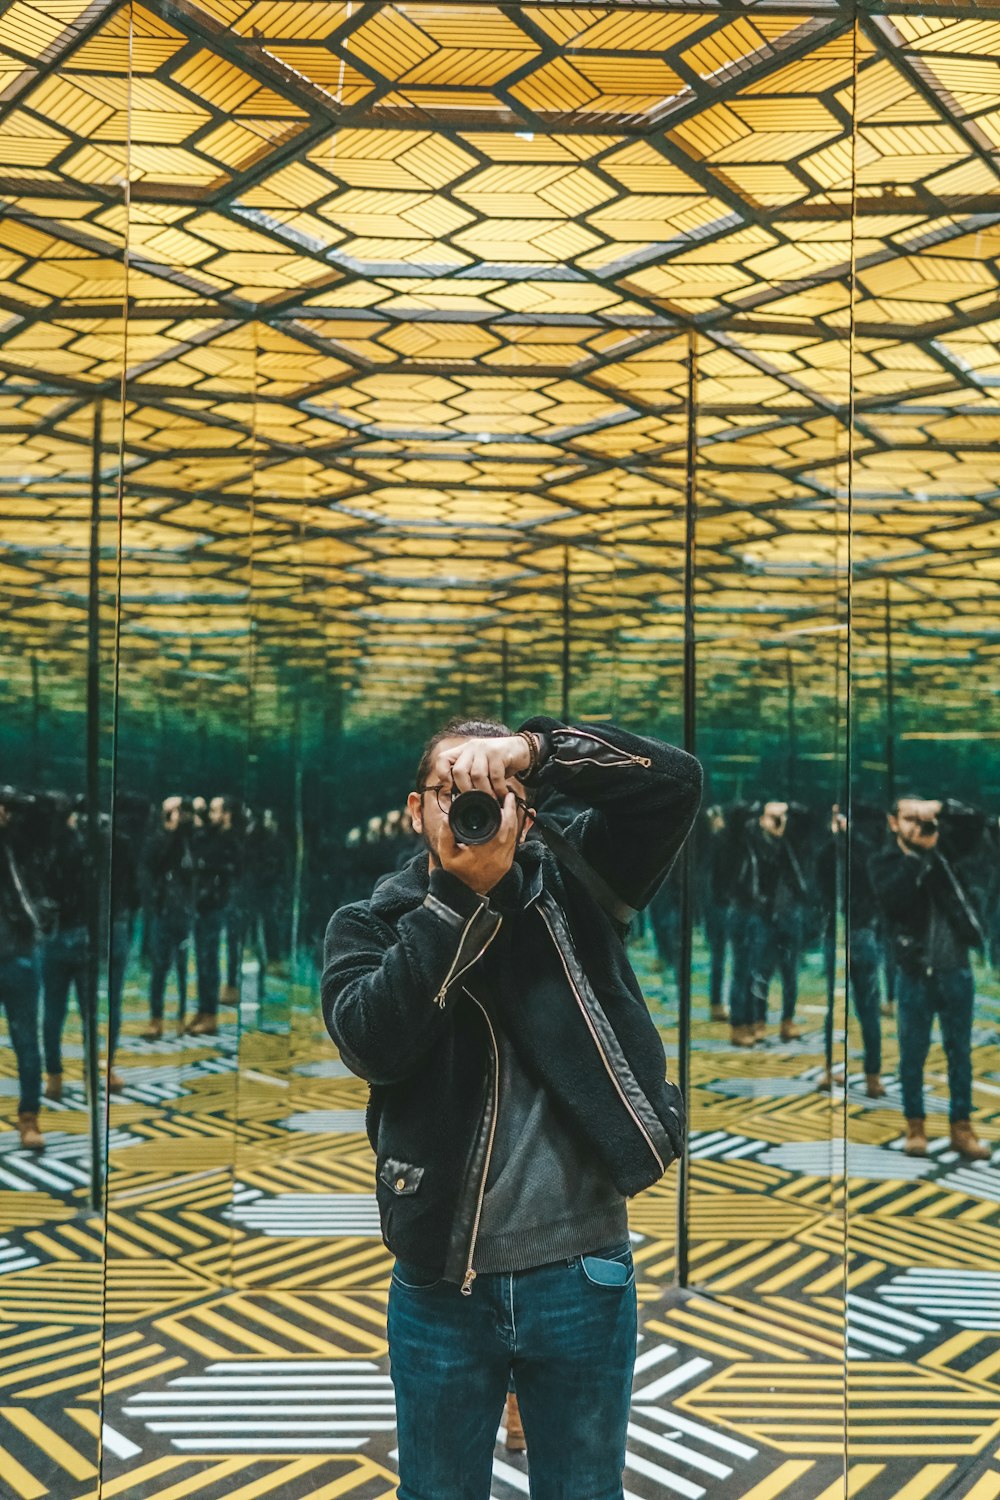 a person taking a picture of a large glass ceiling